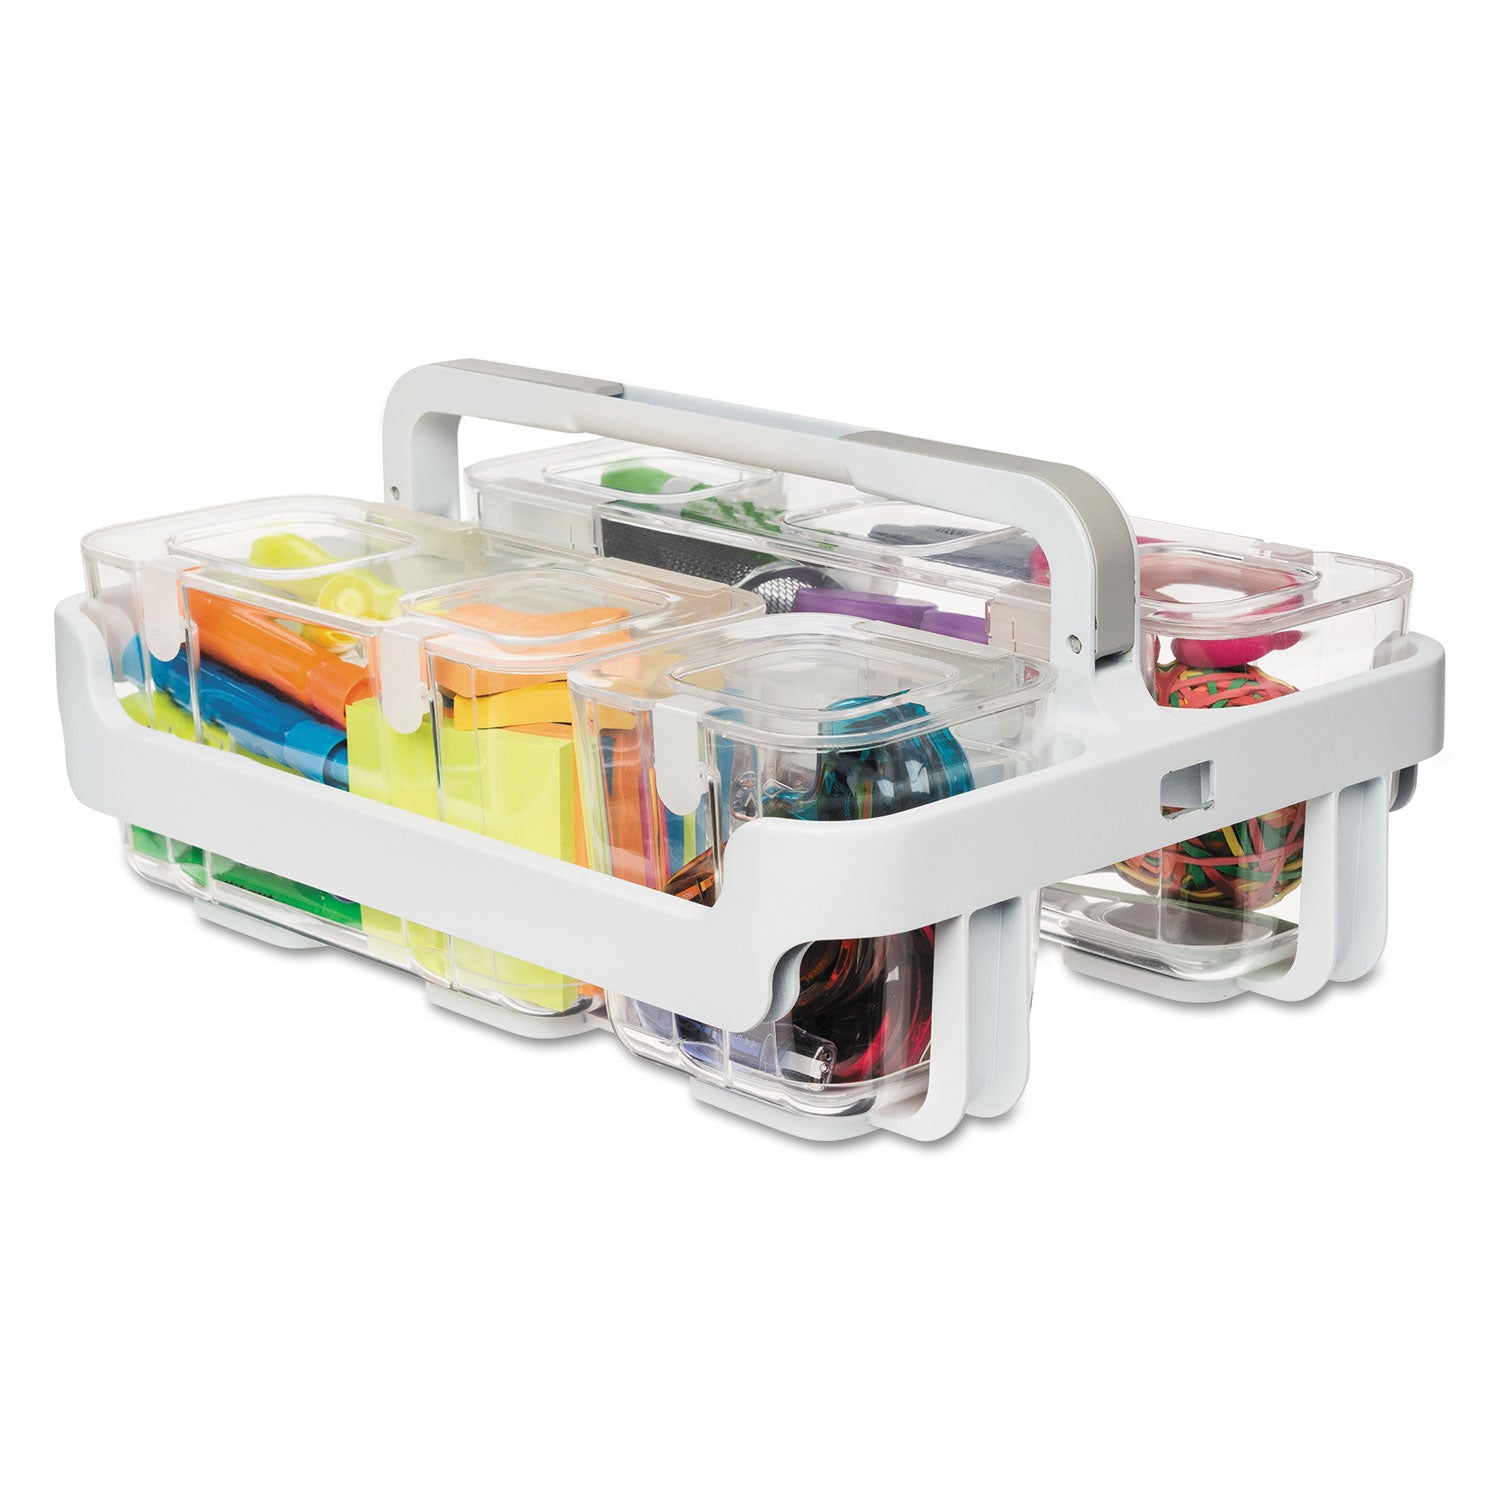 stackable-caddy-organizer-with-s-m-and-l-containers-plastic-105-x-14-x-65-white-caddy-clear-containers_def29003 - 1